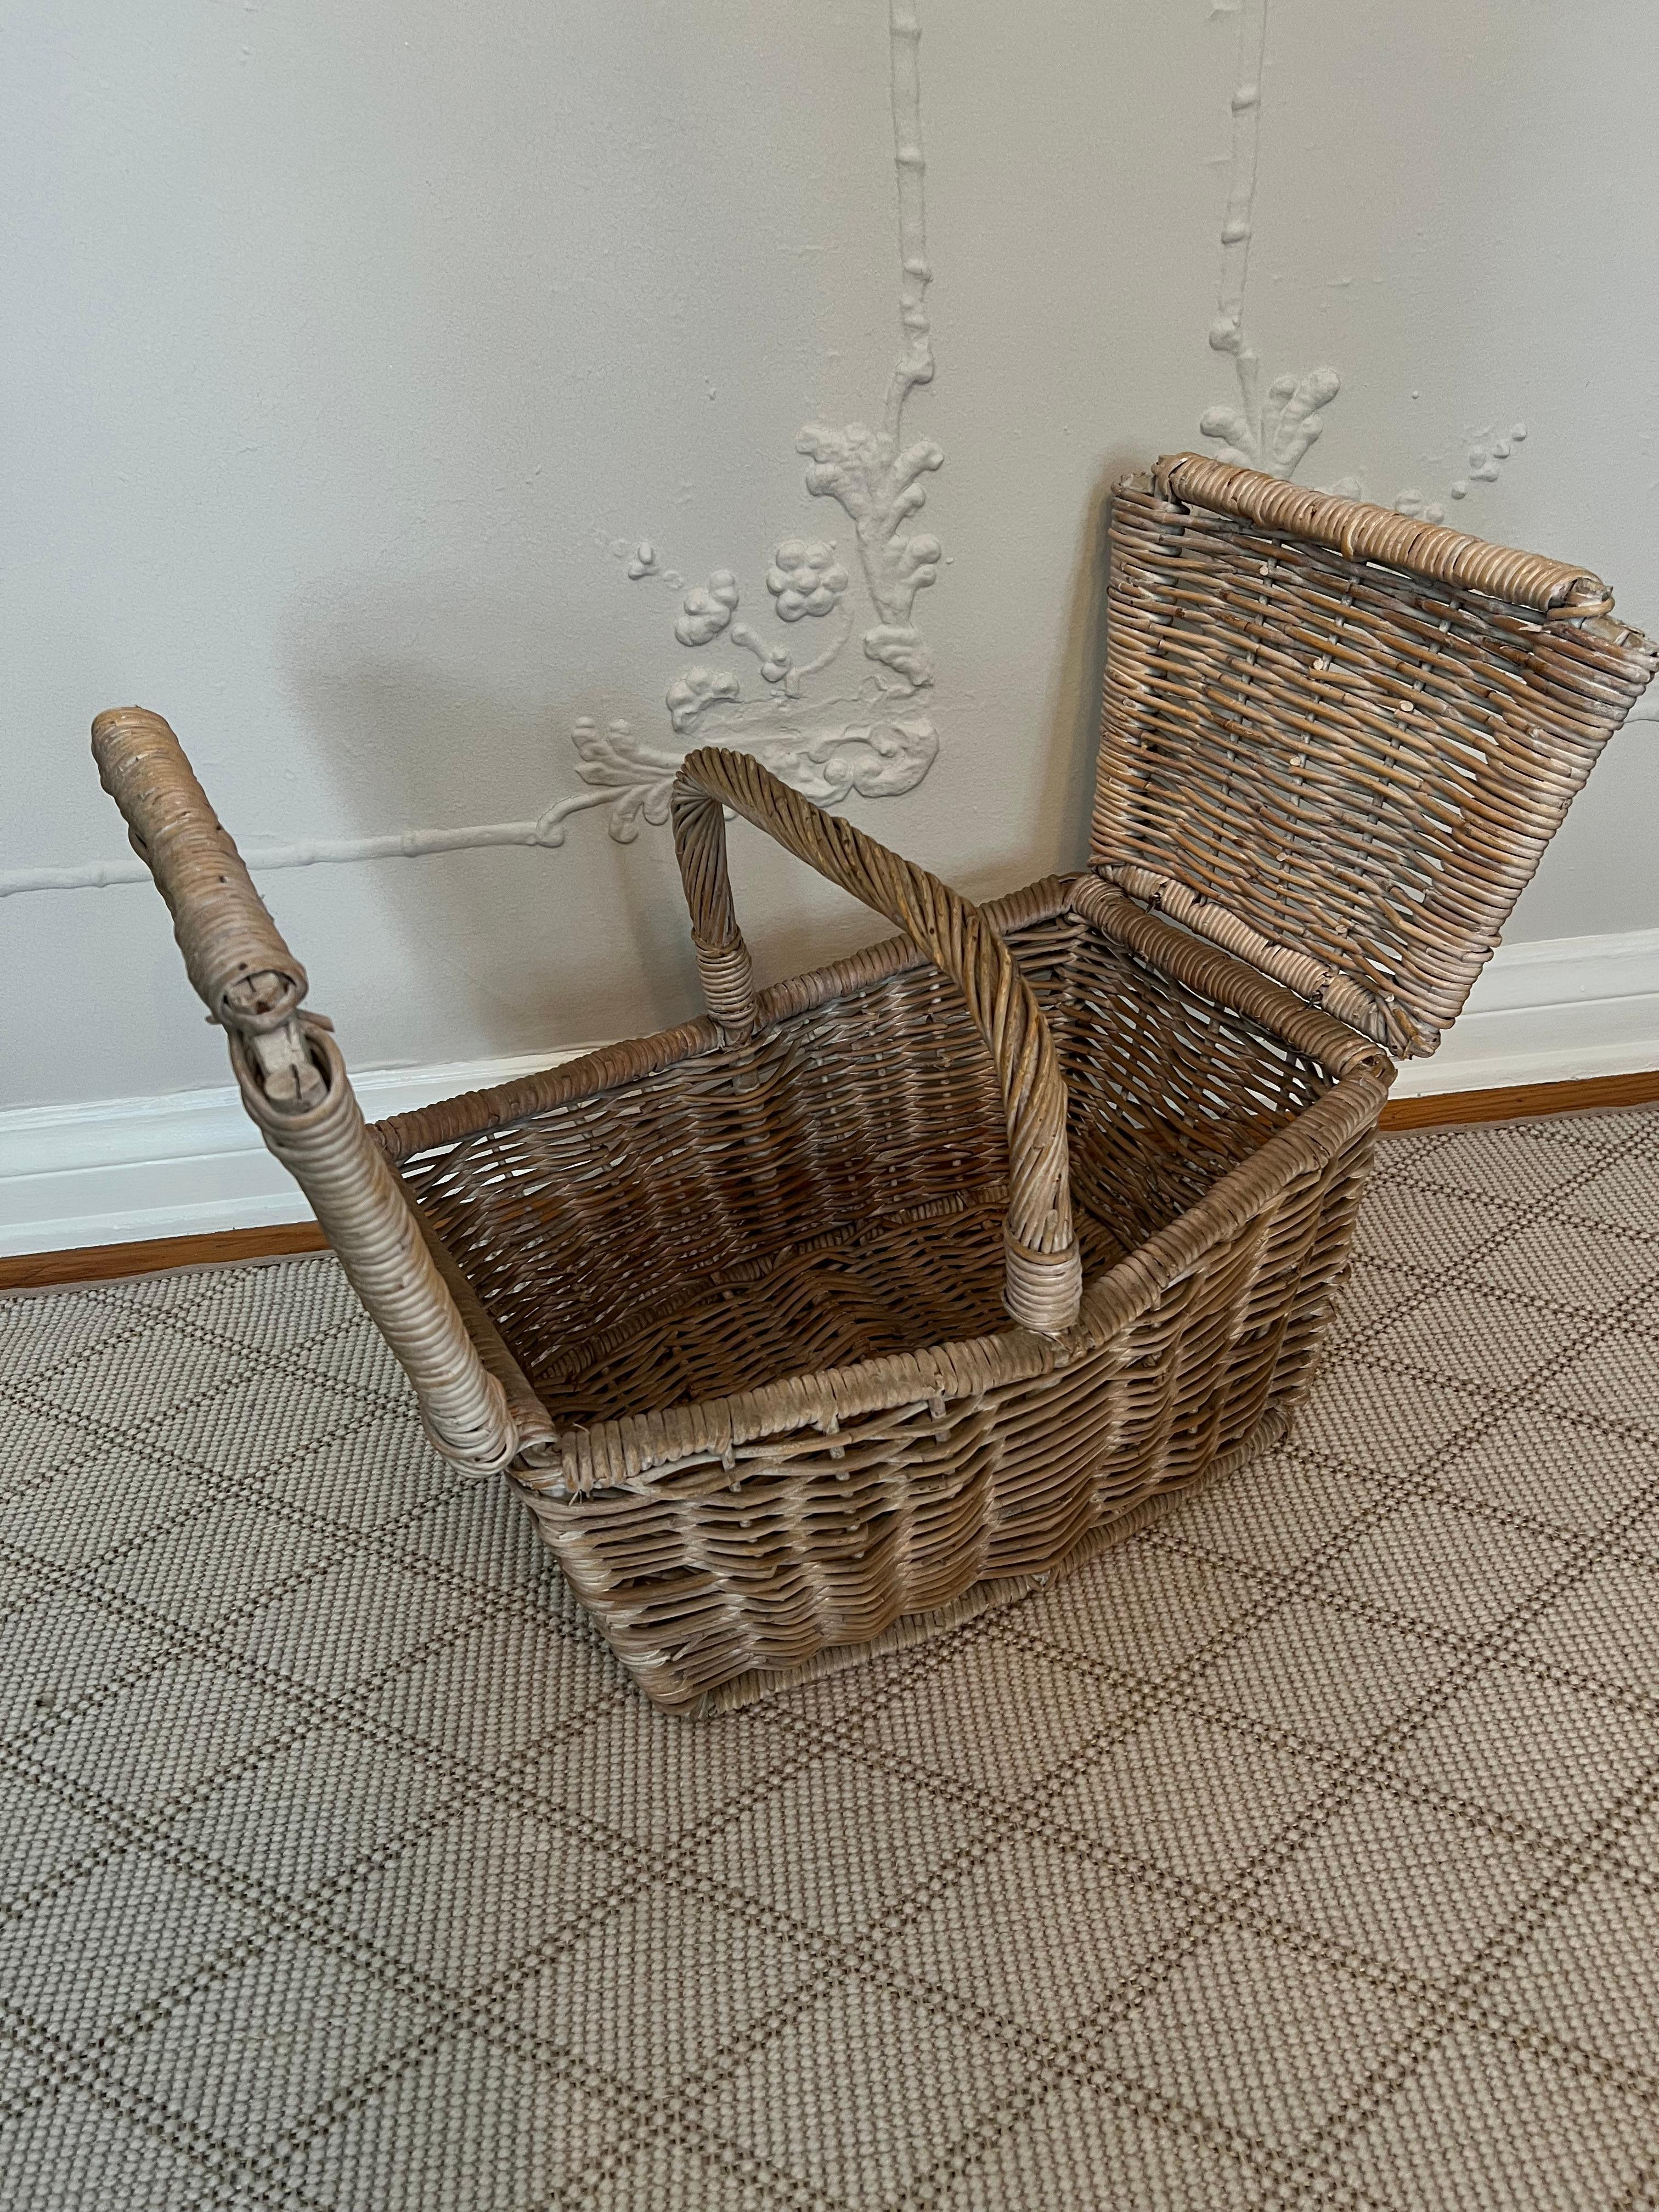 Hand-Woven Woven Rattan Picnic Basket with Center Handle and Duo Opening Sides For Sale